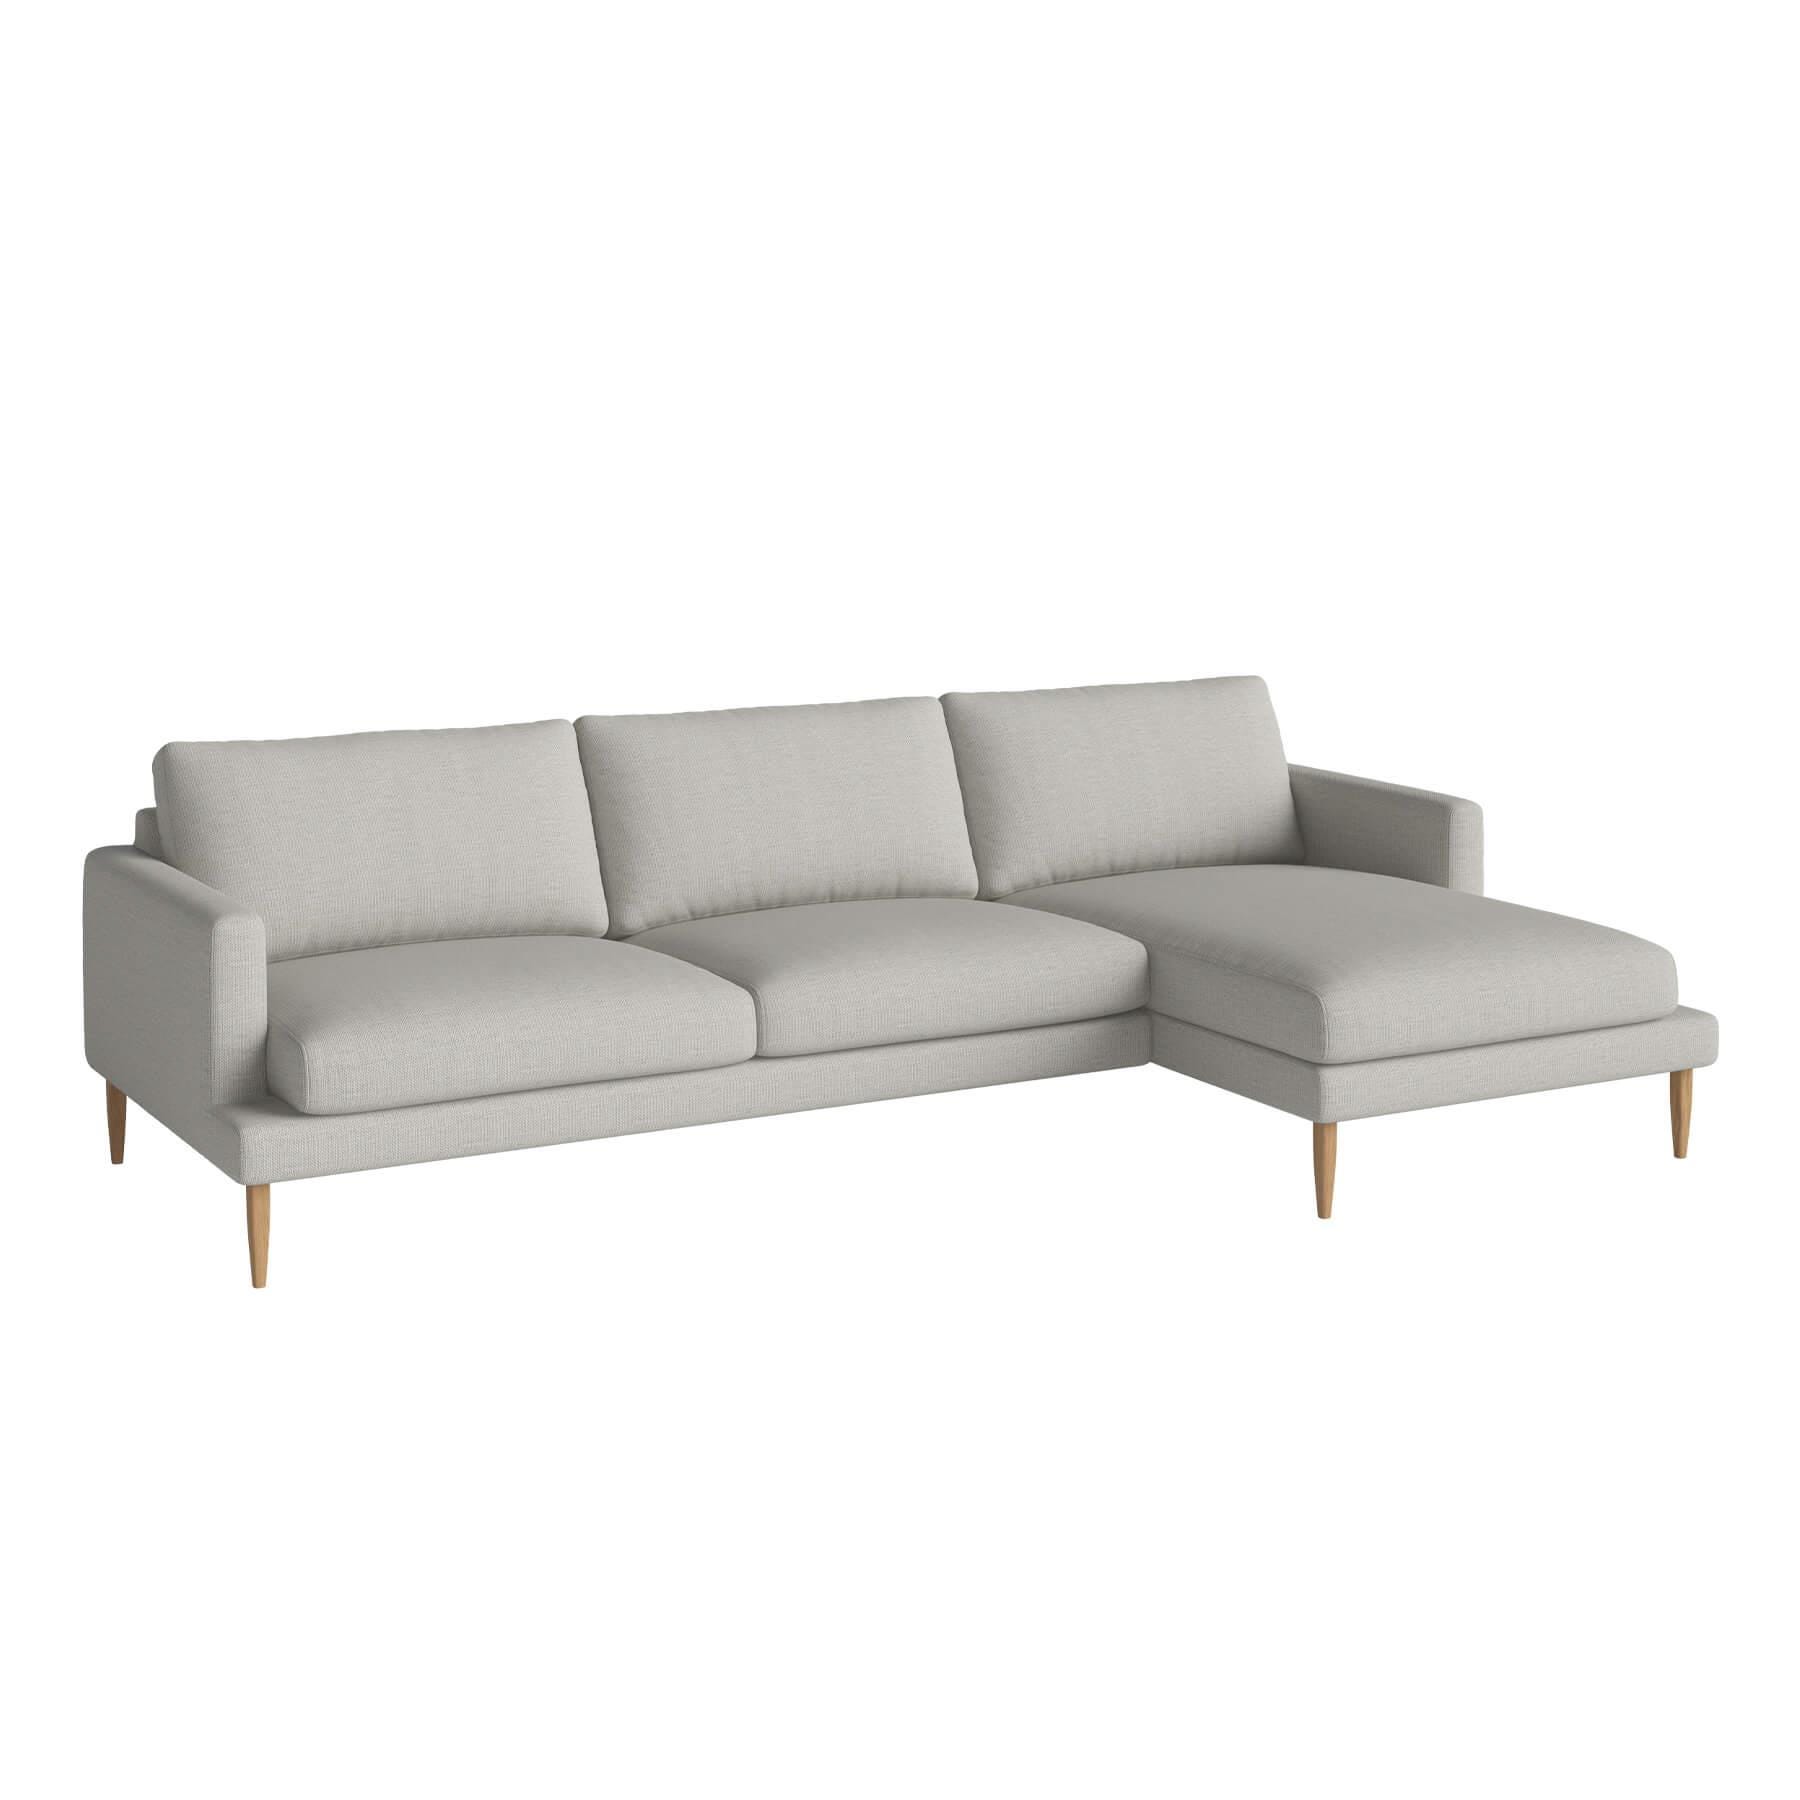 Bolia Veneda Sofa 35 Seater Sofa With Chaise Longue Oiled Oak London Dust Green Right Grey Designer Furniture From Holloways Of Ludlow